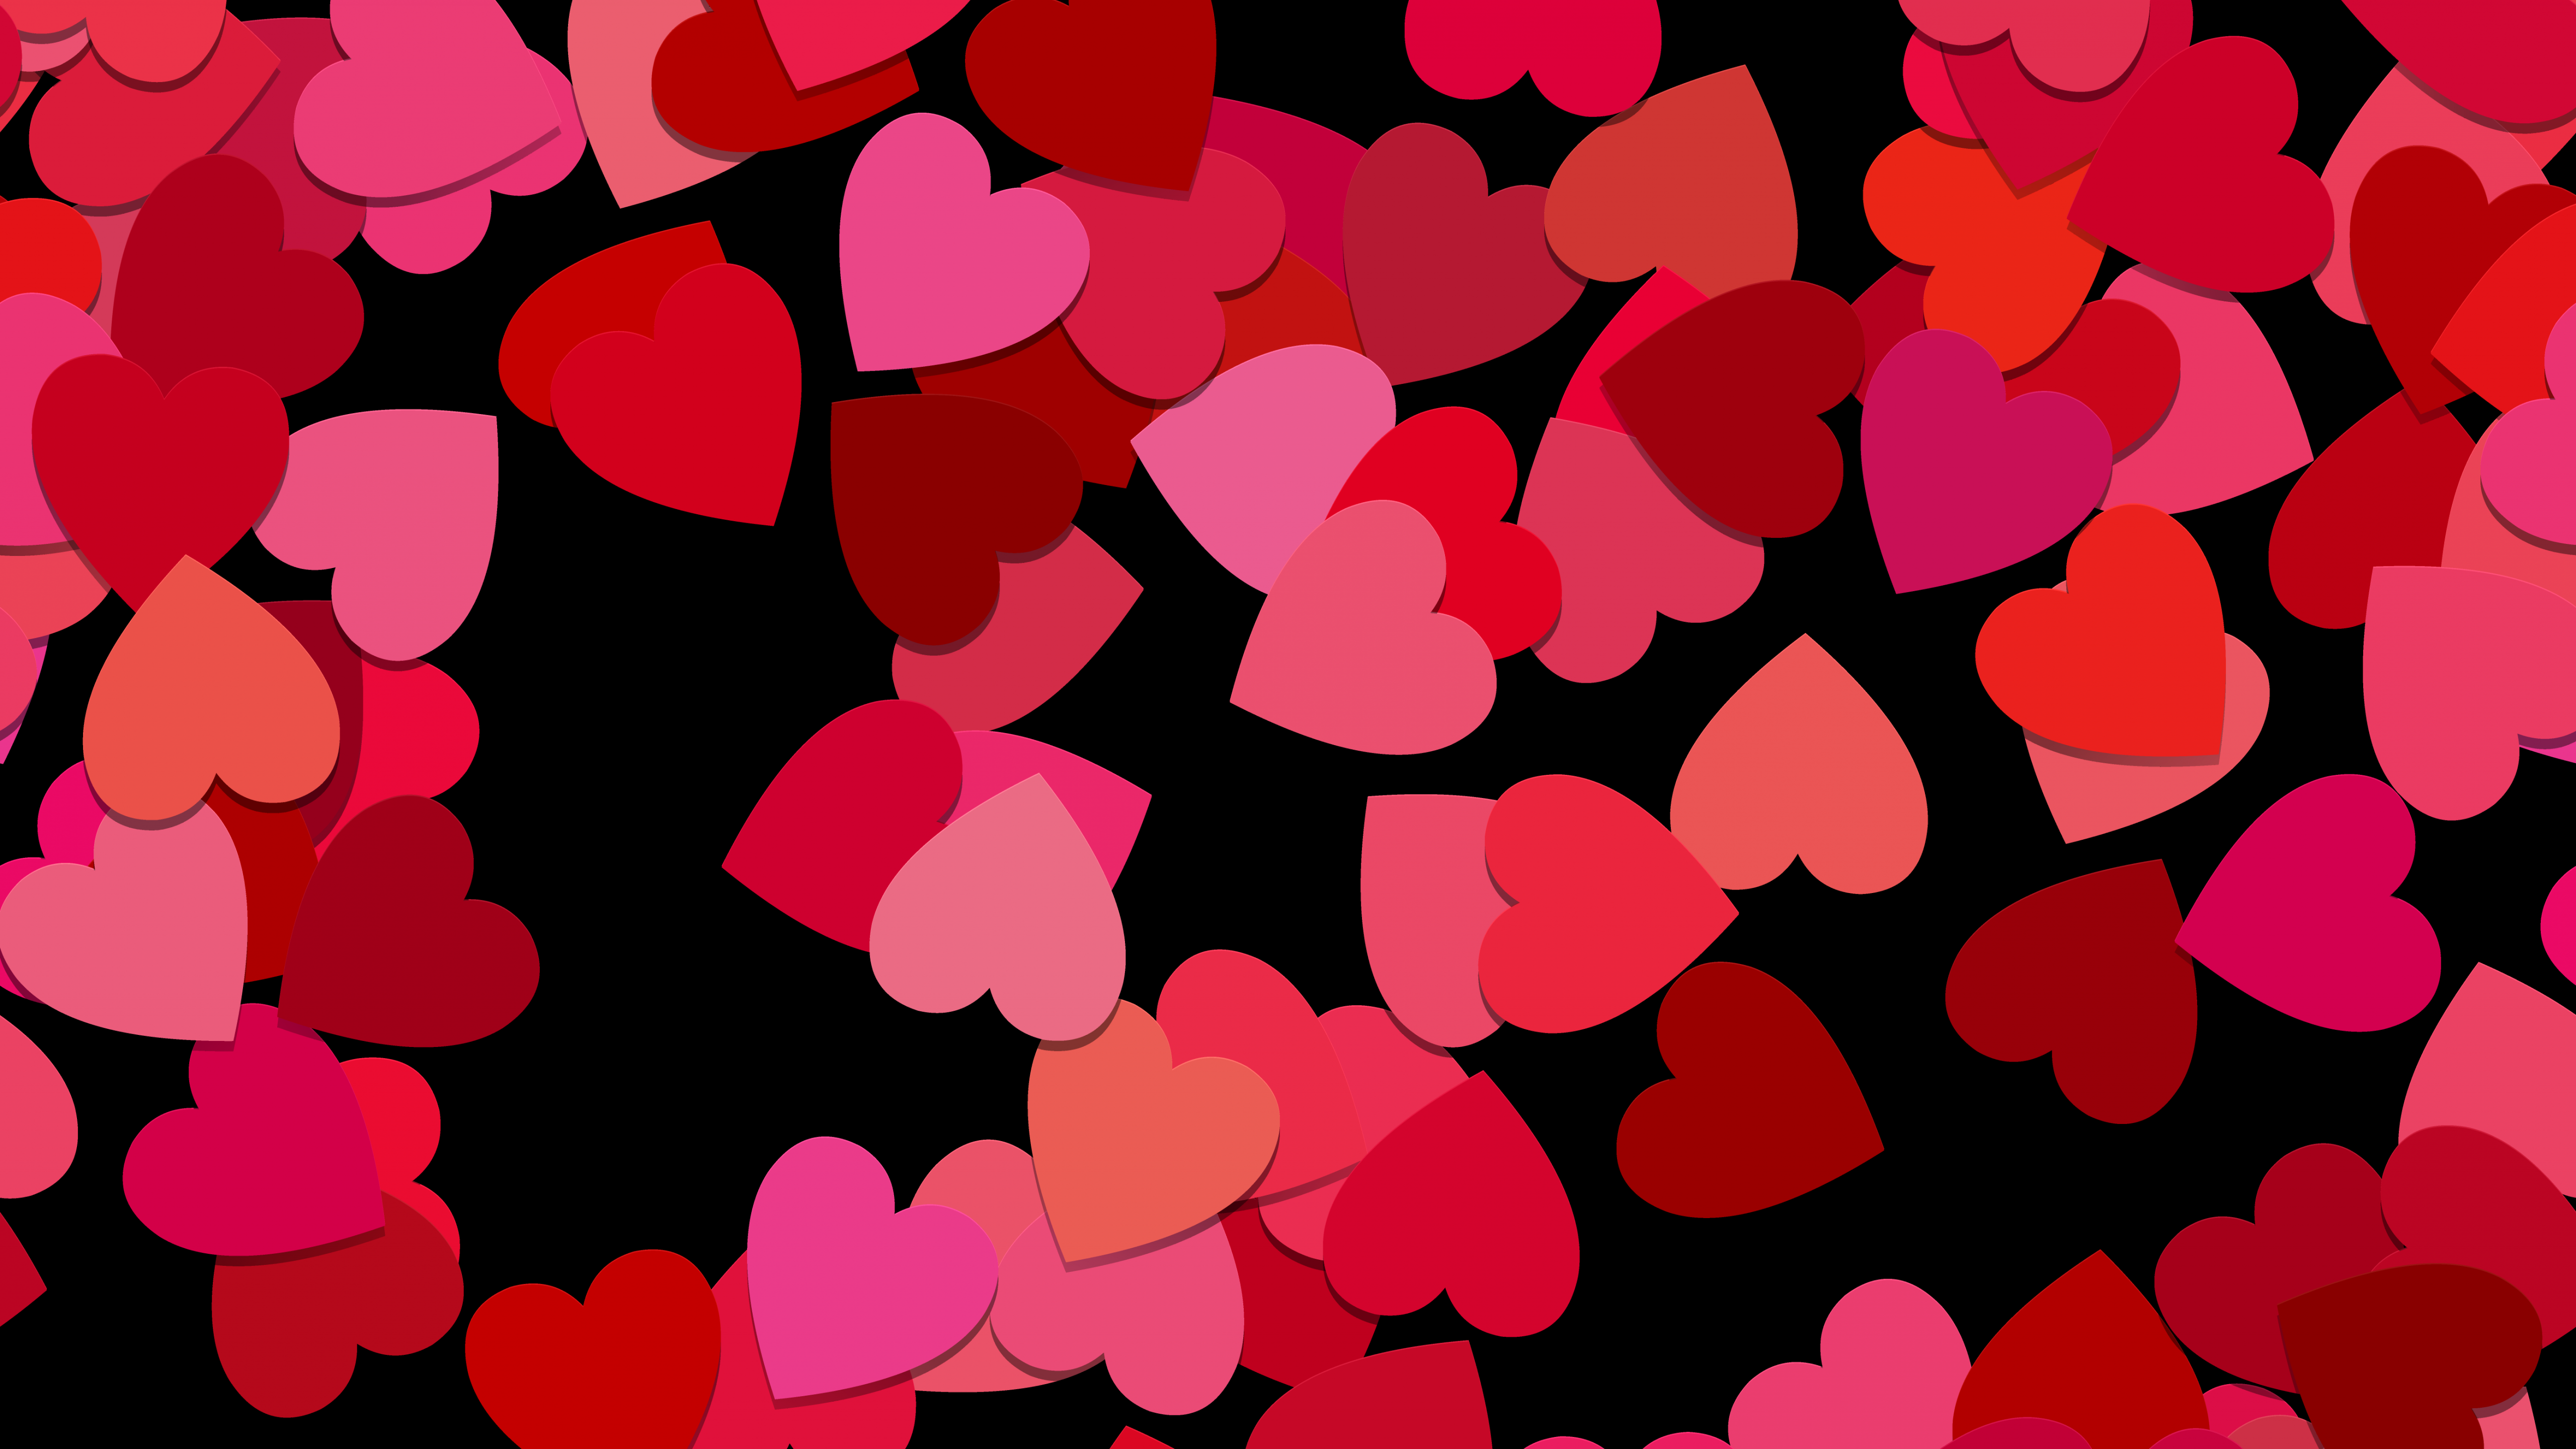 Love hearts 4K Wallpaper, Red hearts, Girly background, 5K, Love